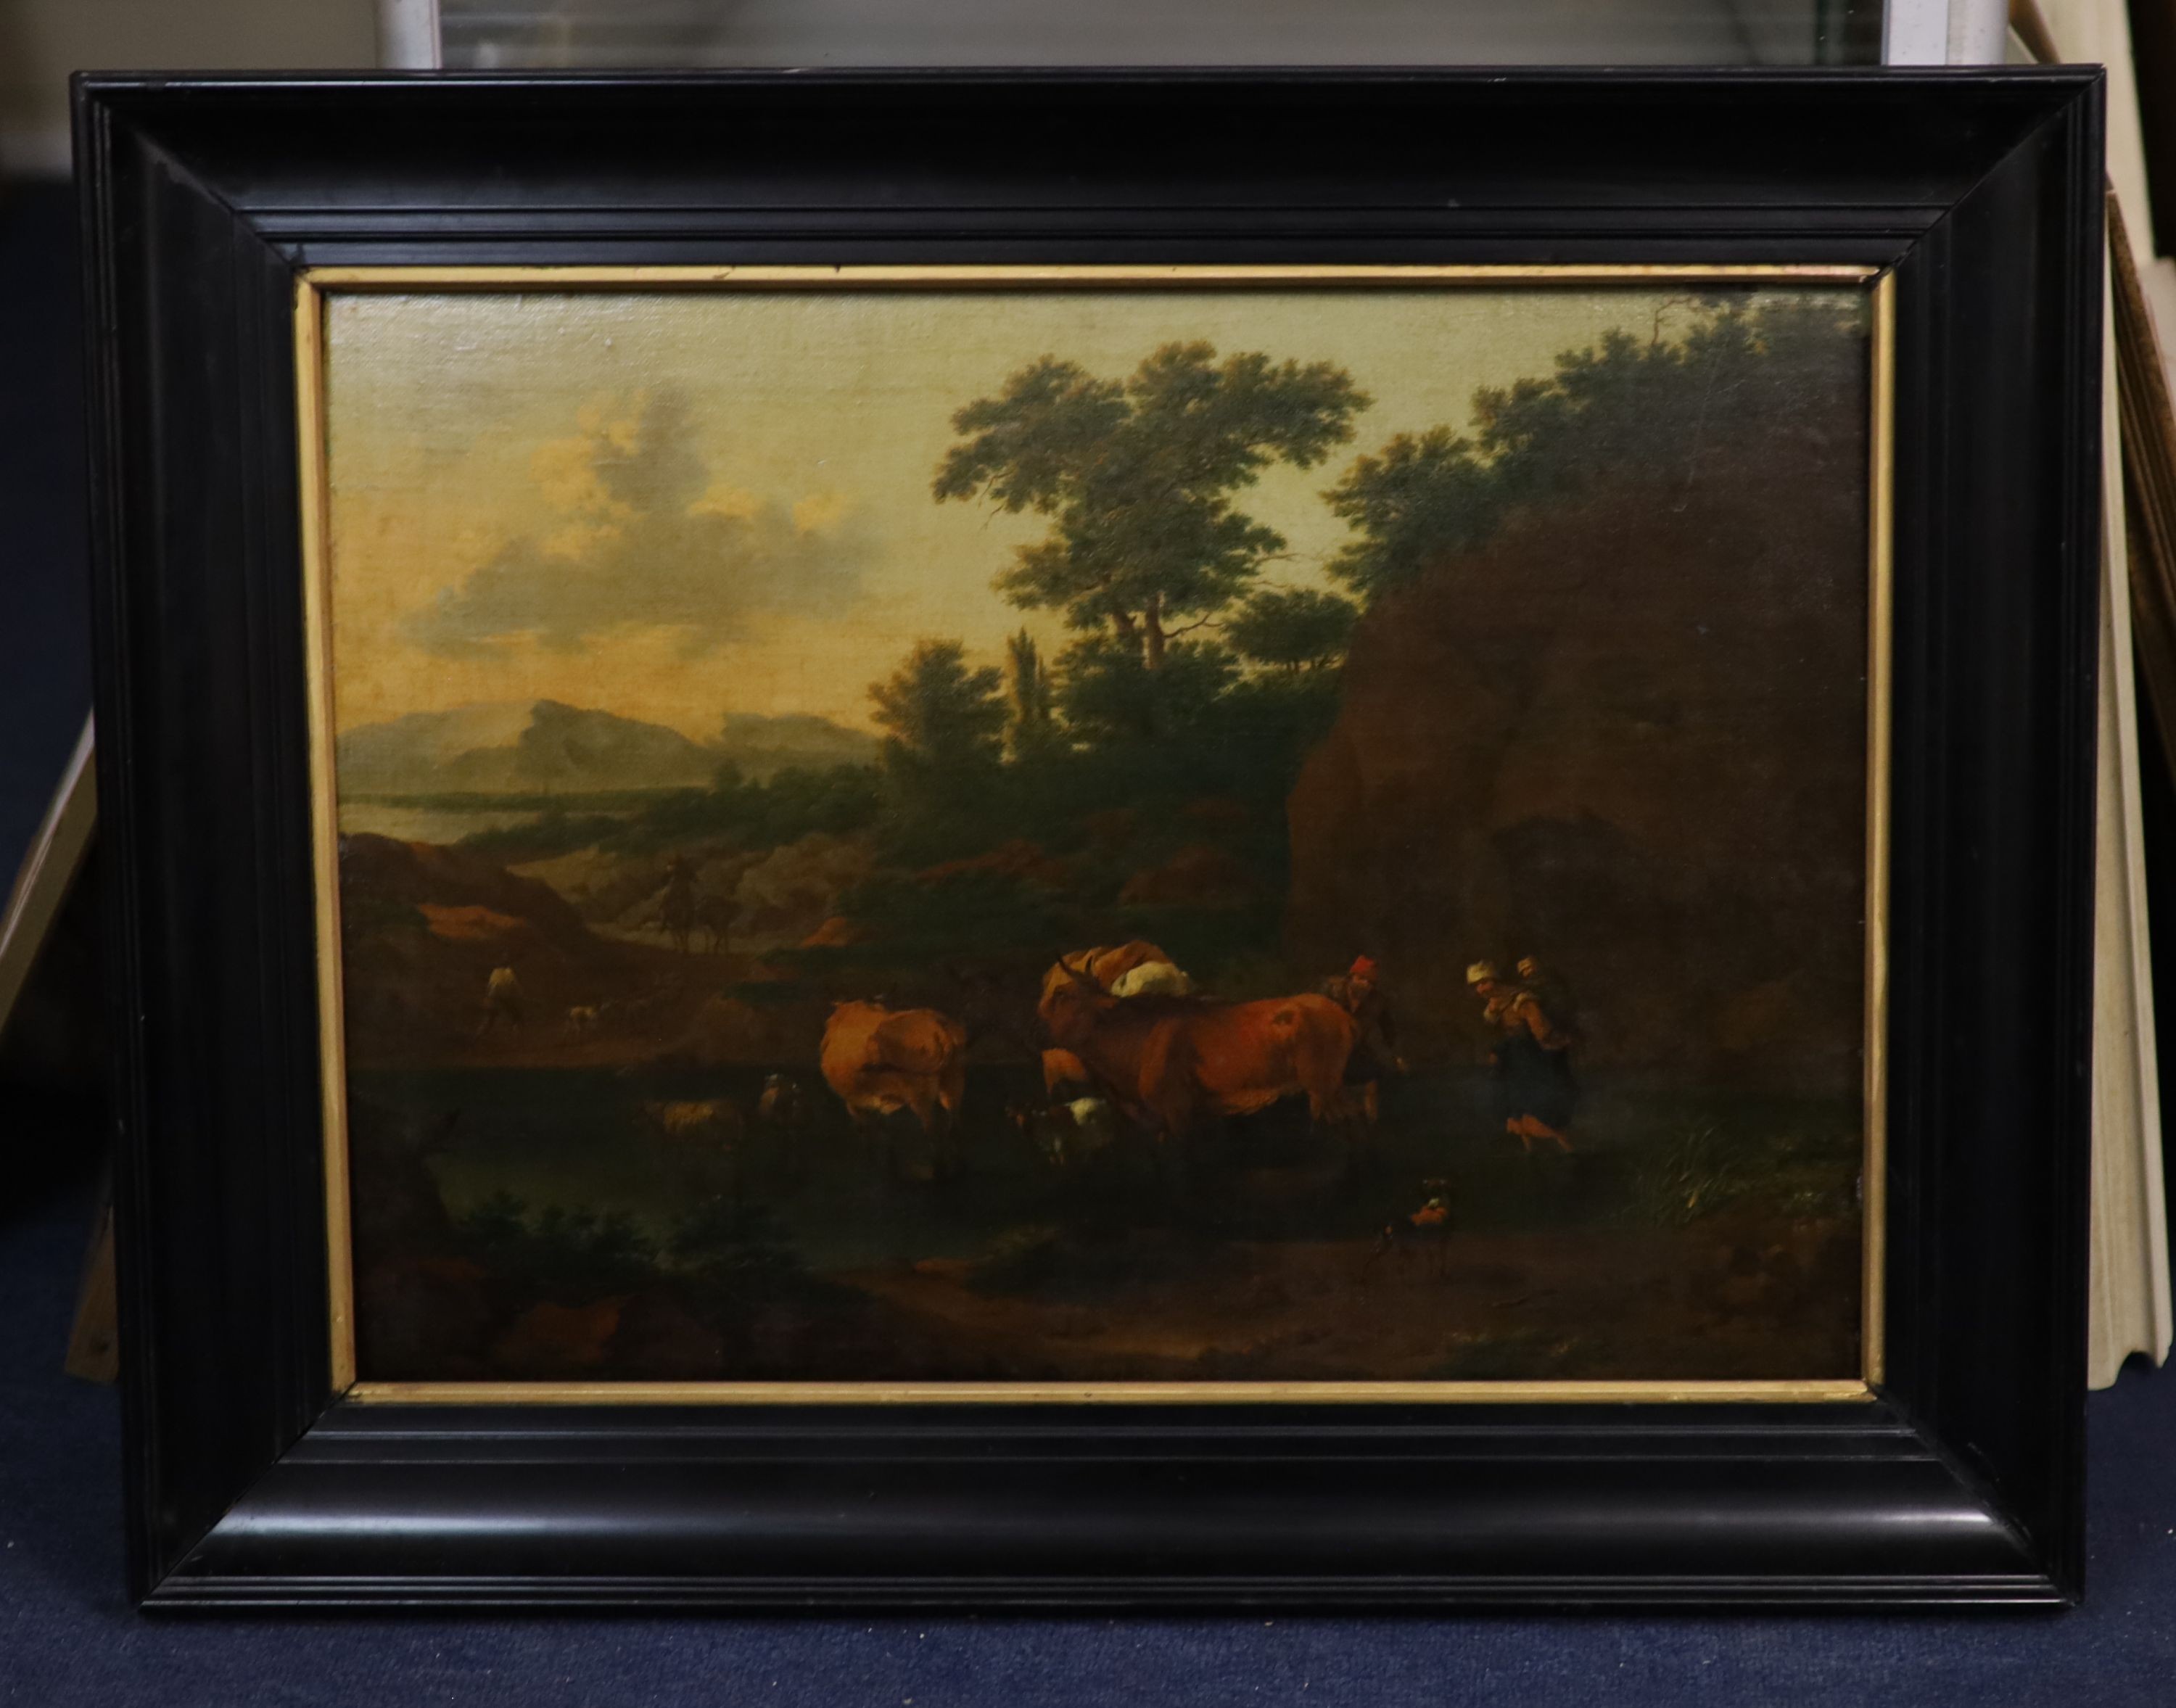 Attributed to Nicholaes Berchem (Dutch, 1620-1683), Landscape with cattle drovers crossing a river, oil on canvas laid onto a wooden panel, 41 x 57cm